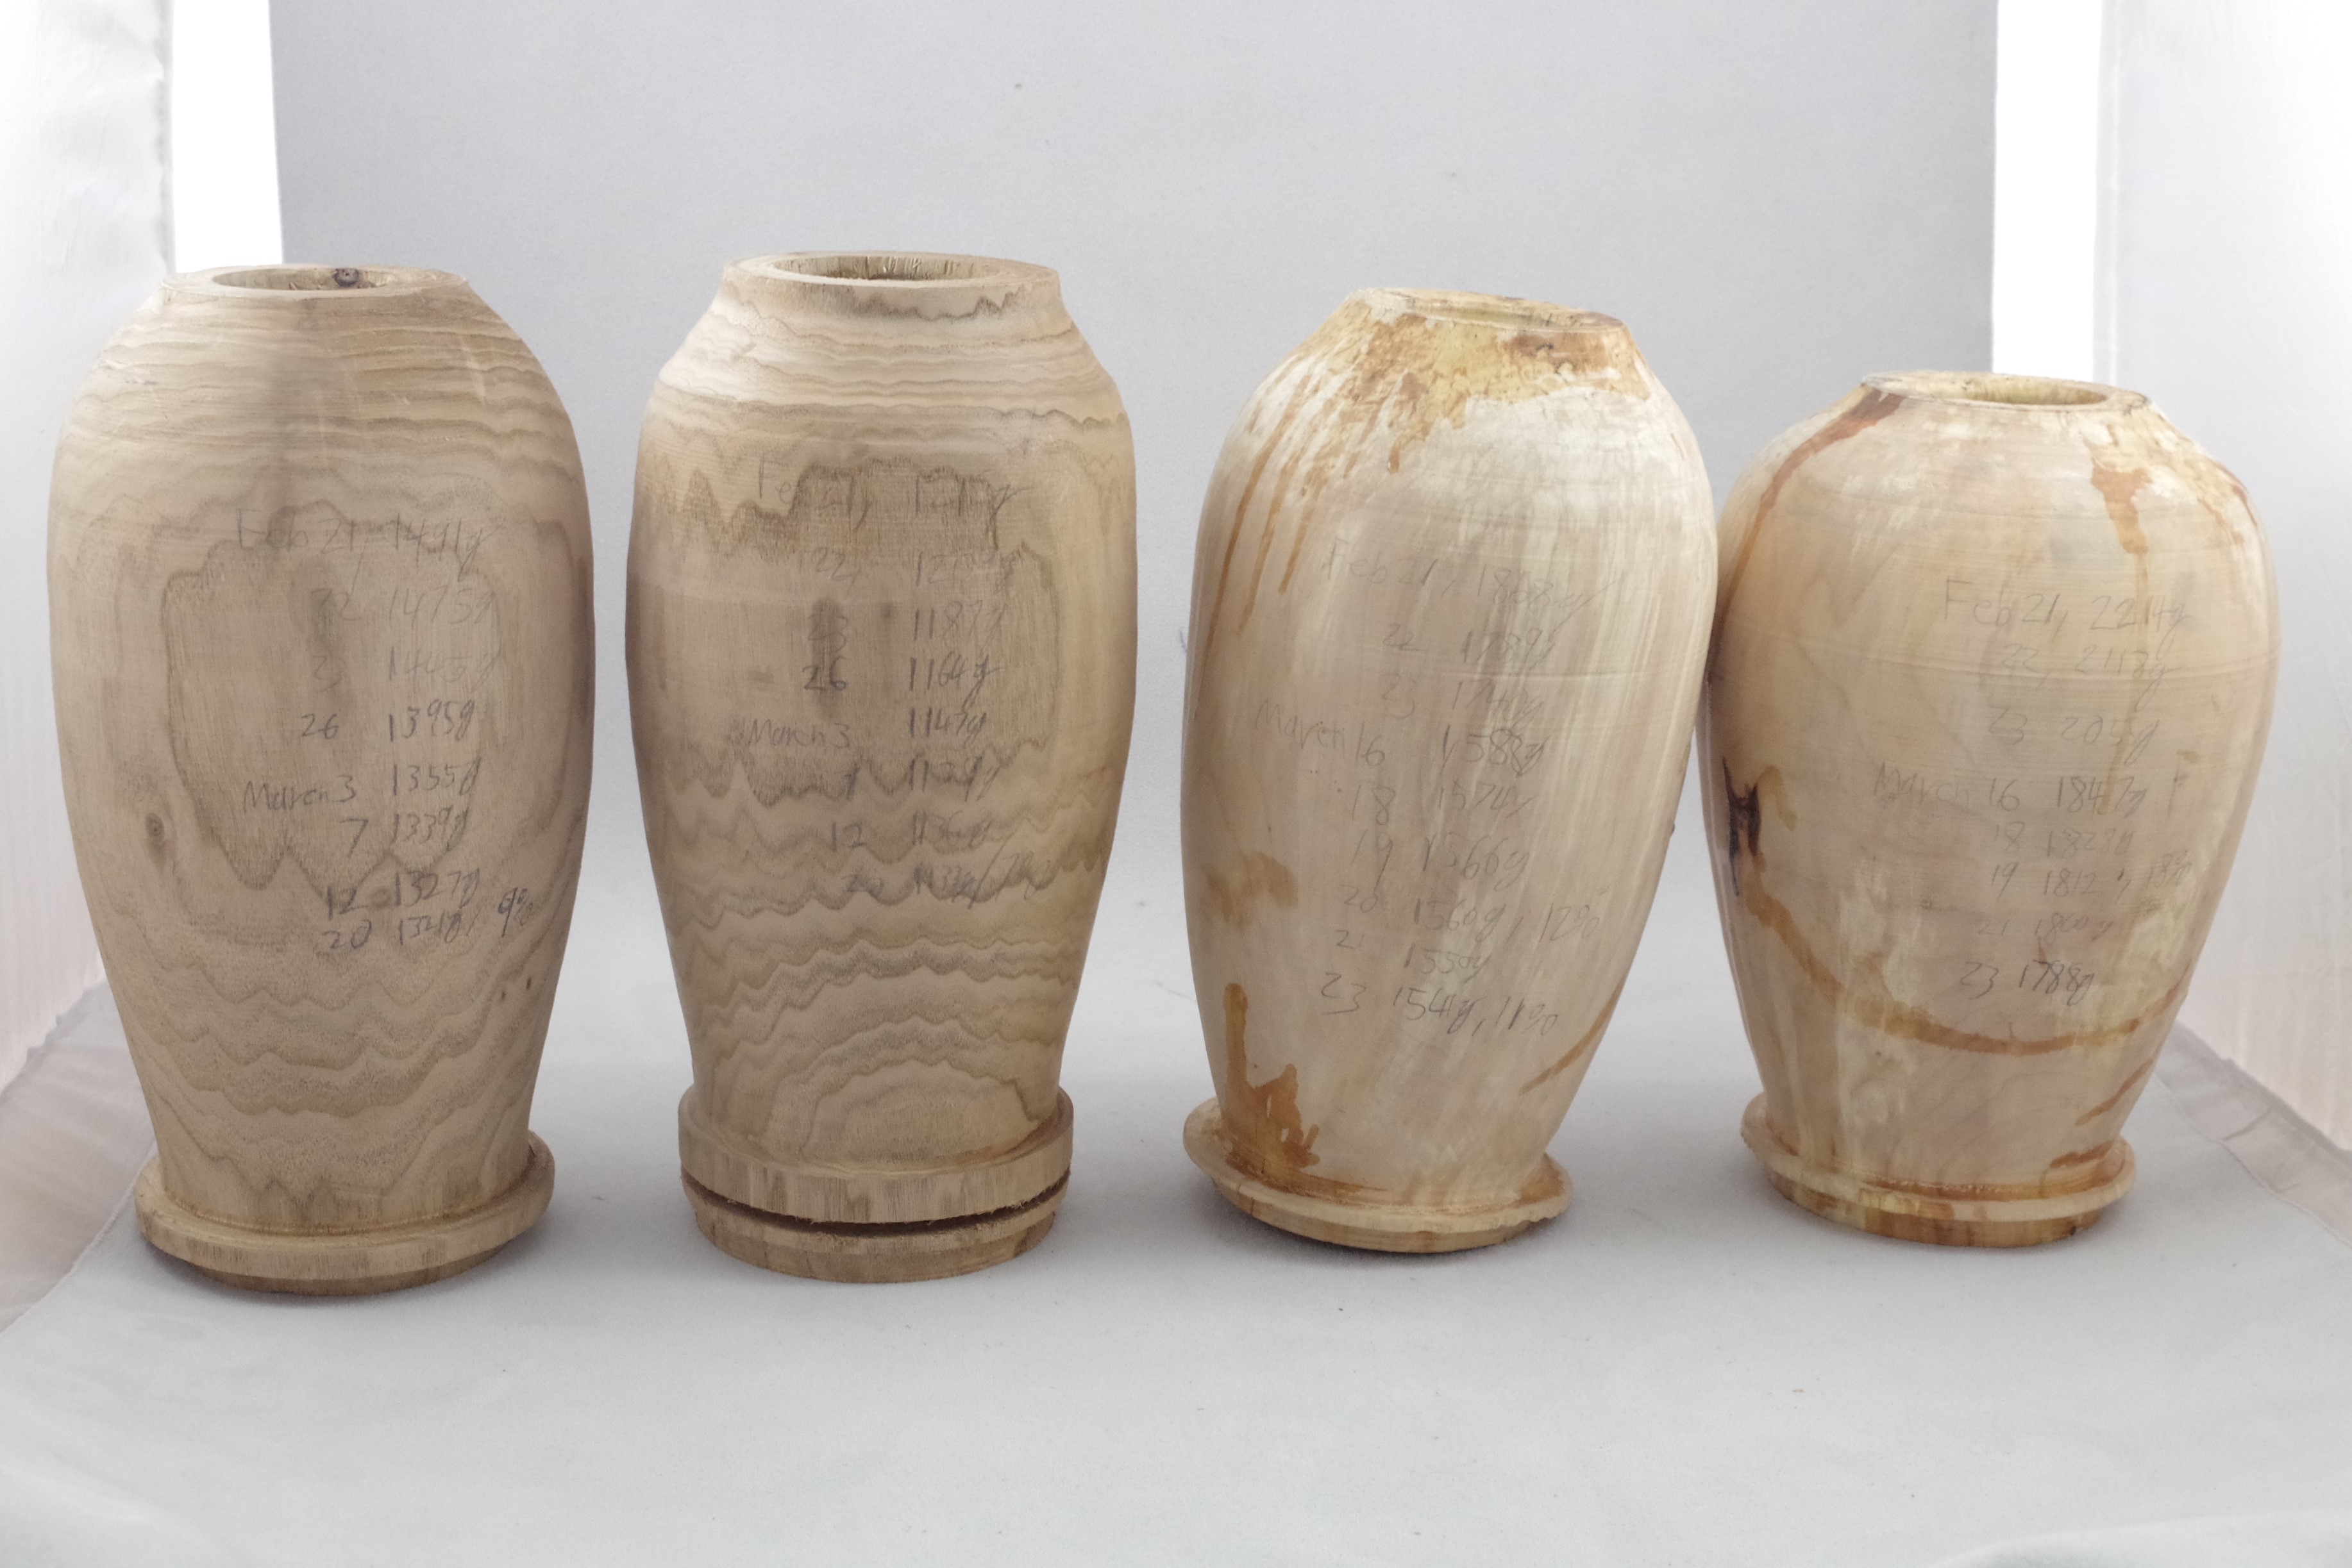 Roughed out urns